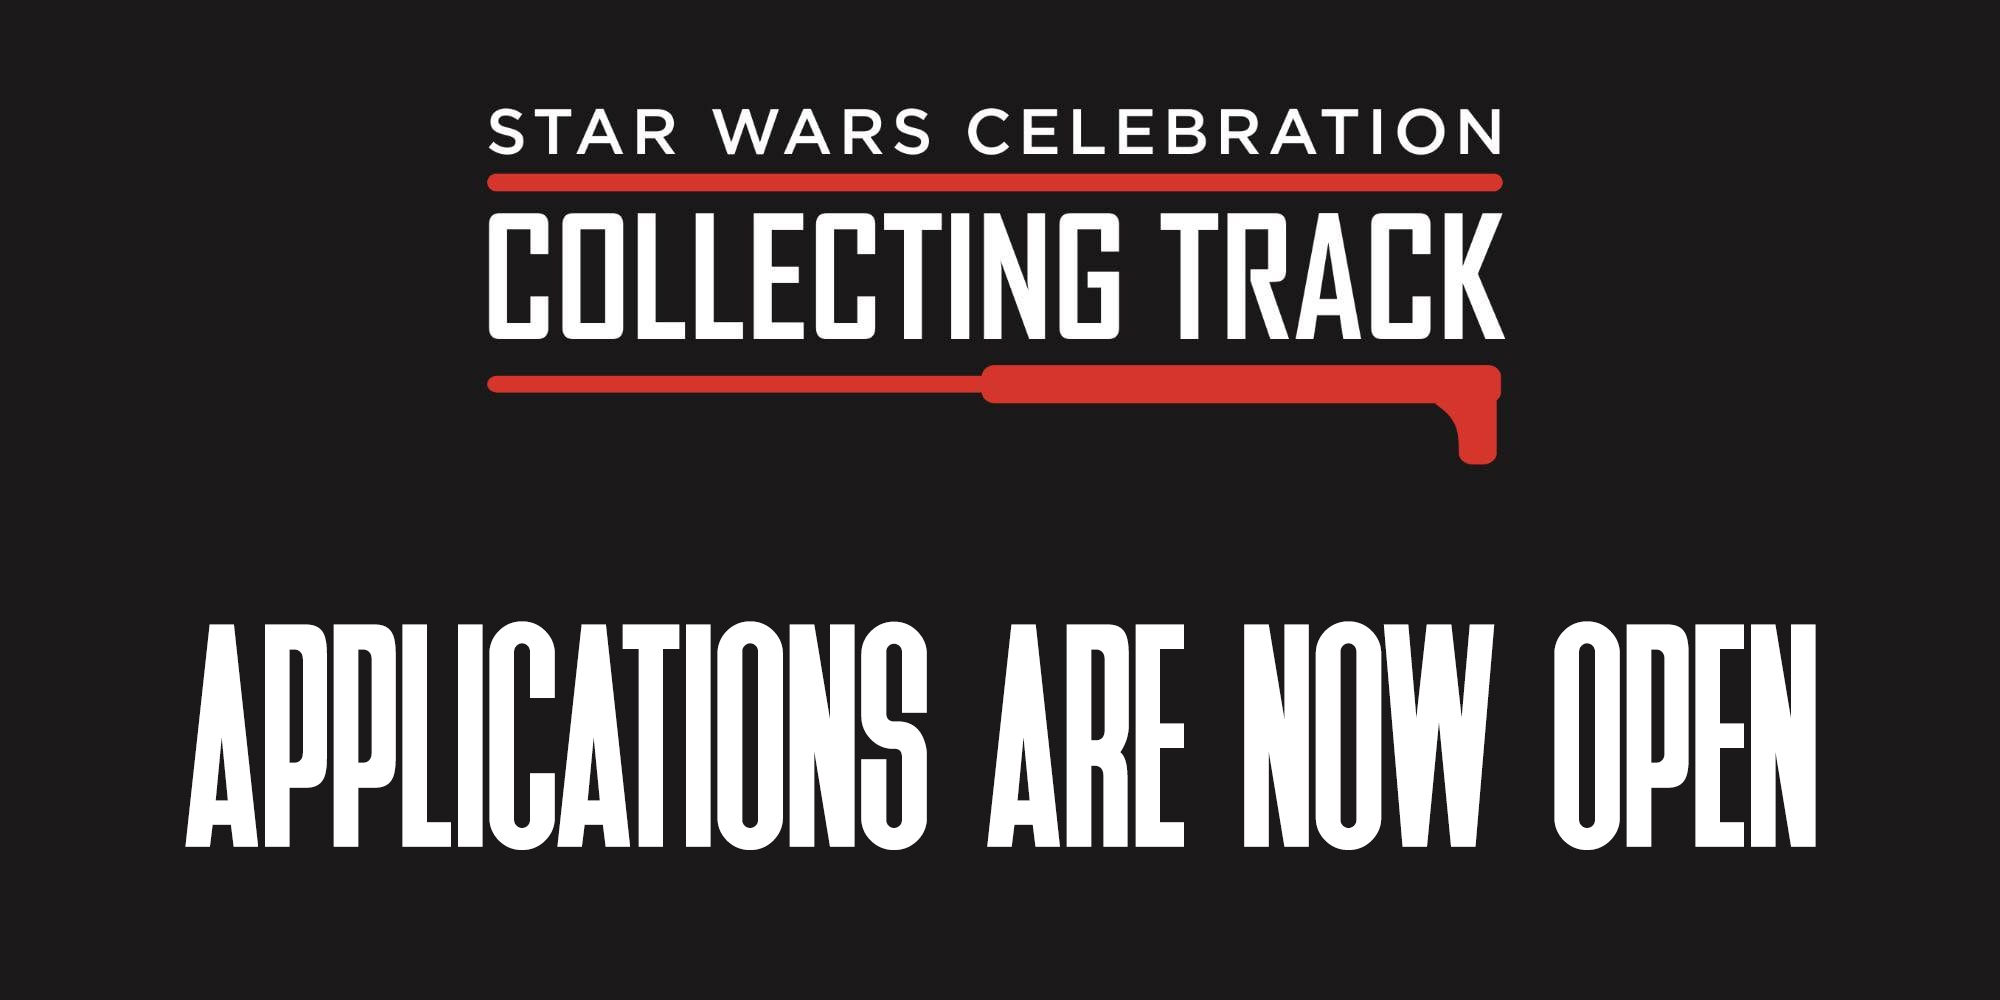 Star Wars Celebration Collecting Track